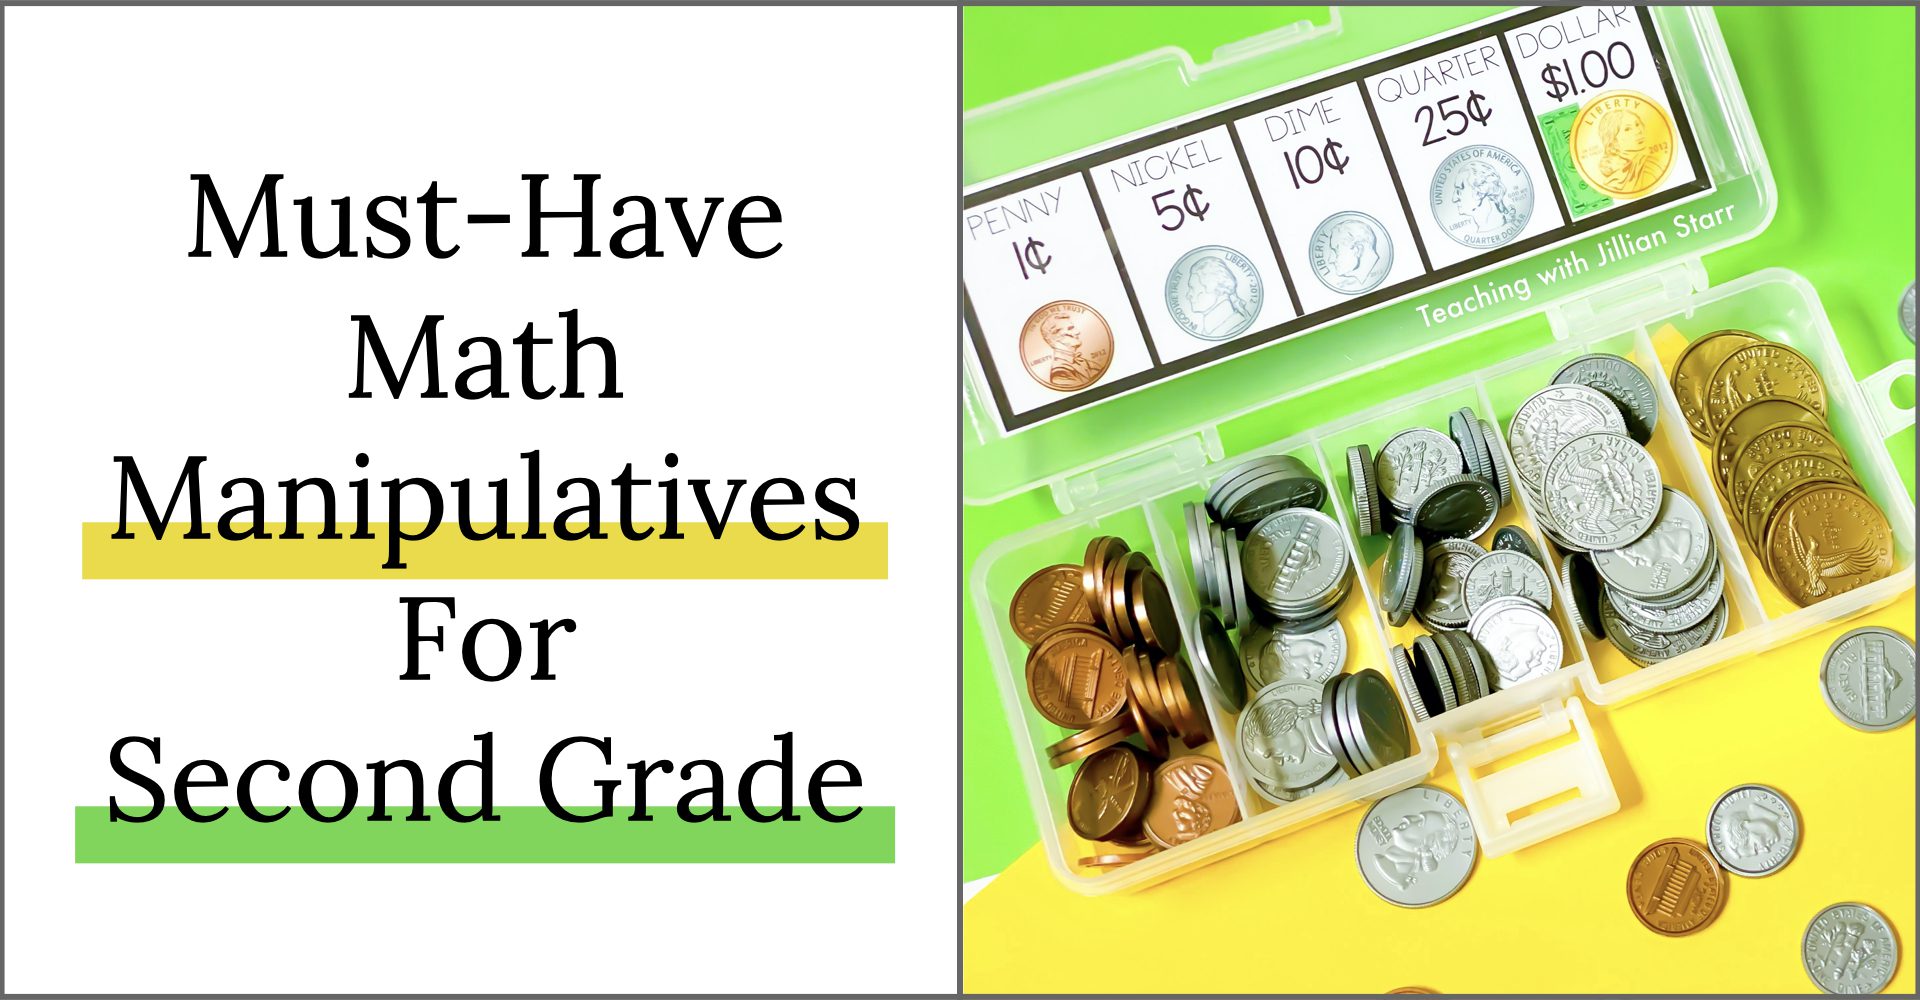 Five Must-Have Math Manipulatives for Second Grade. Second grade math manipulatives for centers and small group work.